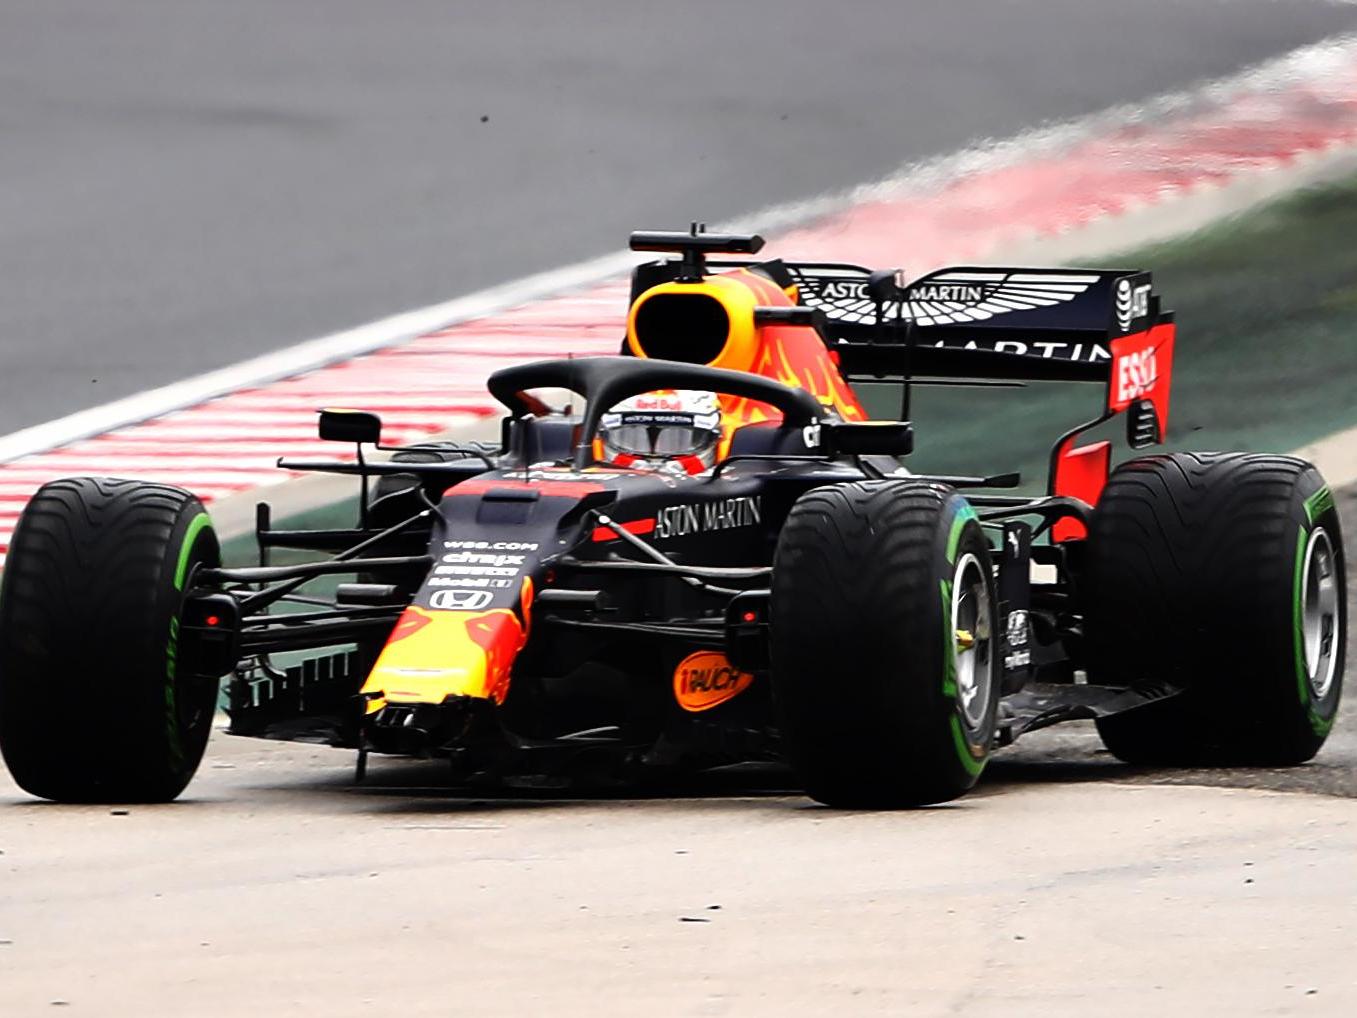 Max Verstappen crashes on his way to the grid for the Hungarian Grand Prix